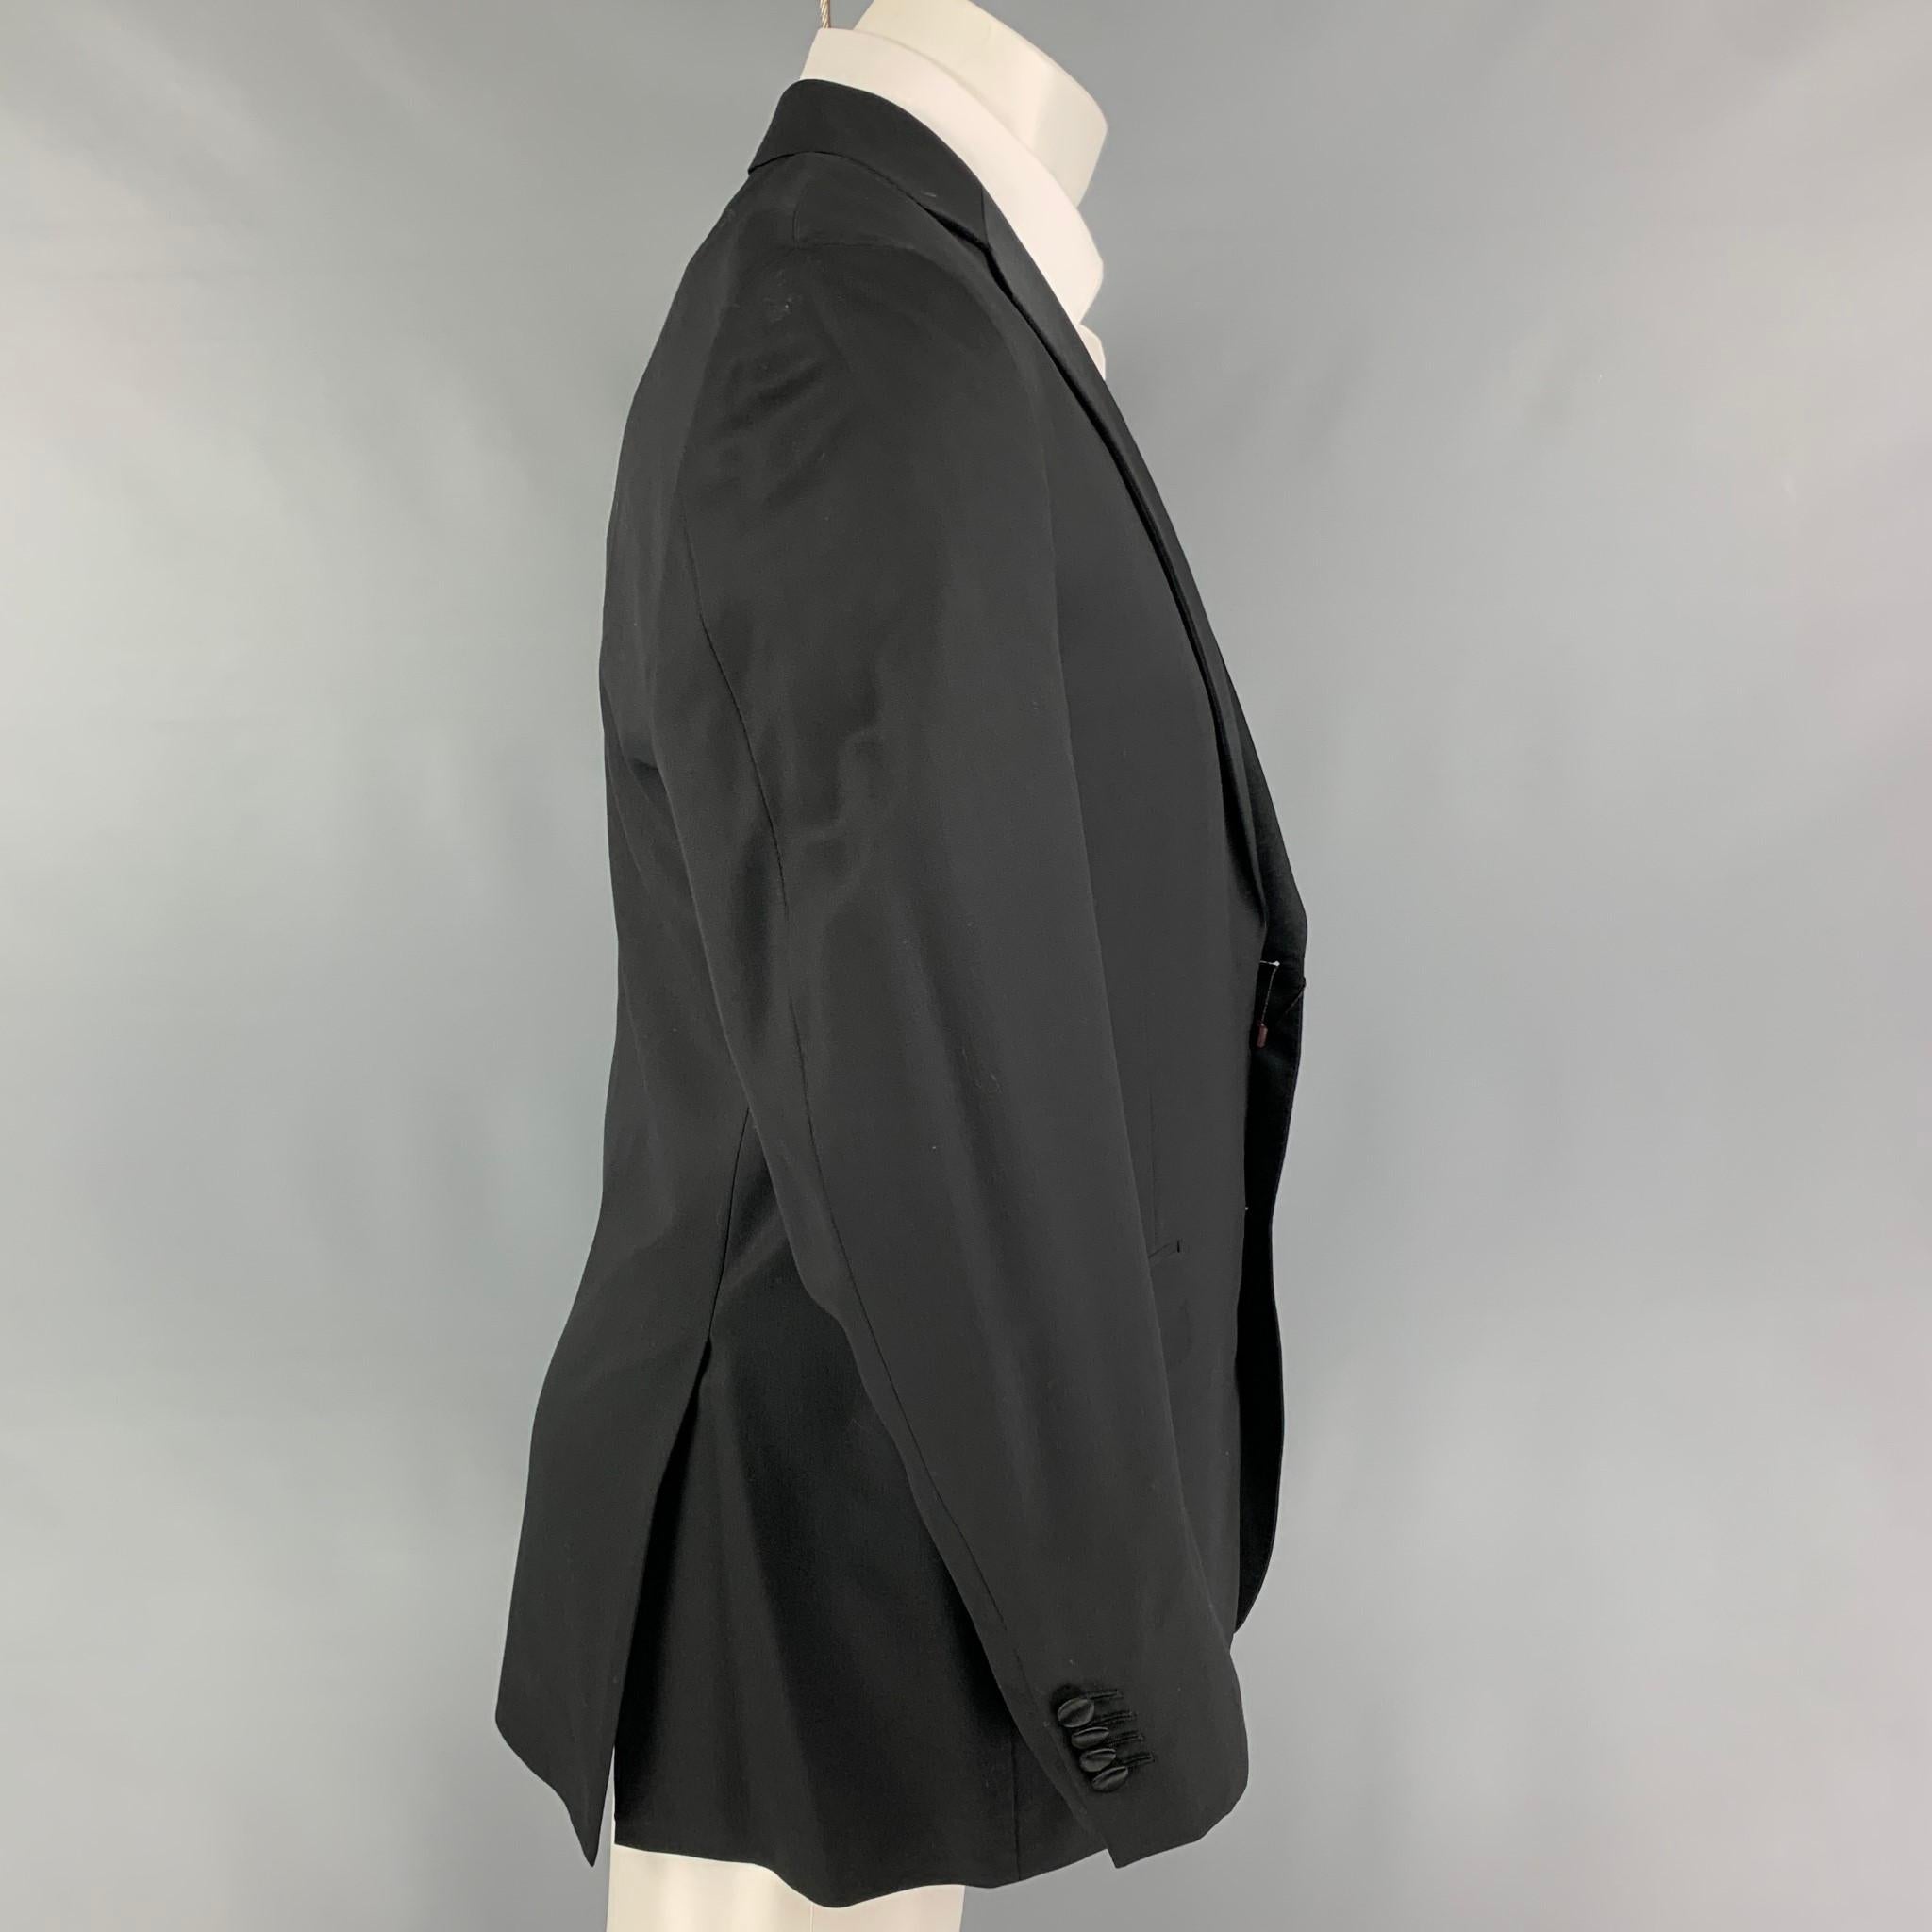 PORTS INTERNATIONAL tuxedo sport coat comes in a black wool with a full red liner featuring a notch lapel, flap pockets, double back vent, and a double button closure. Includes tags.

Very Good Pre-Owned Condition. Missing one button closure.